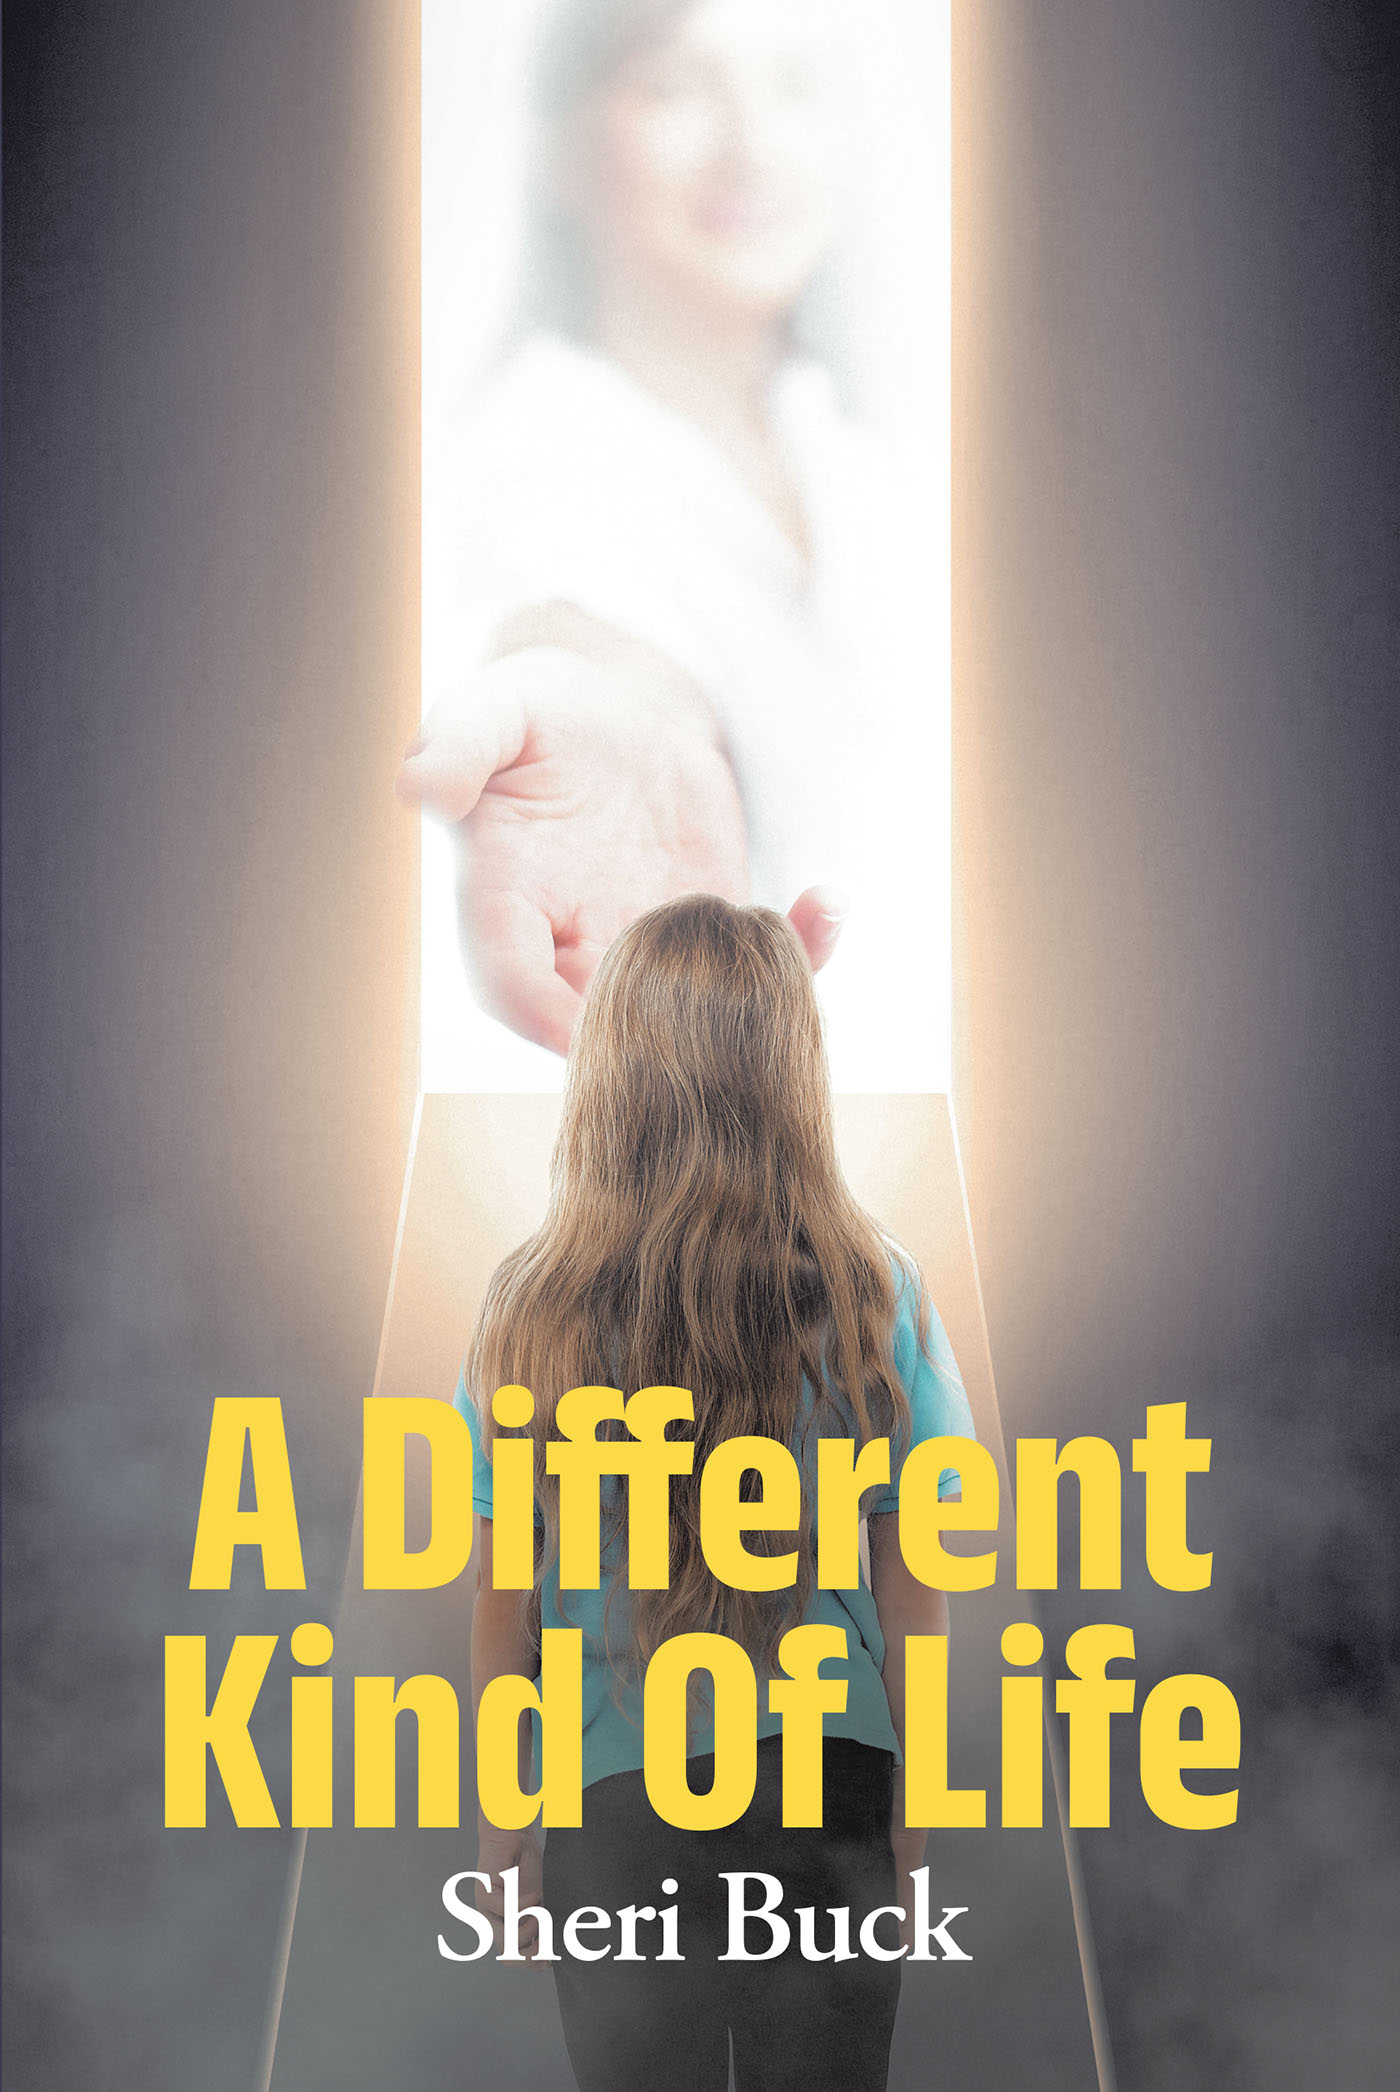 A Different Kind Of Life Cover Image